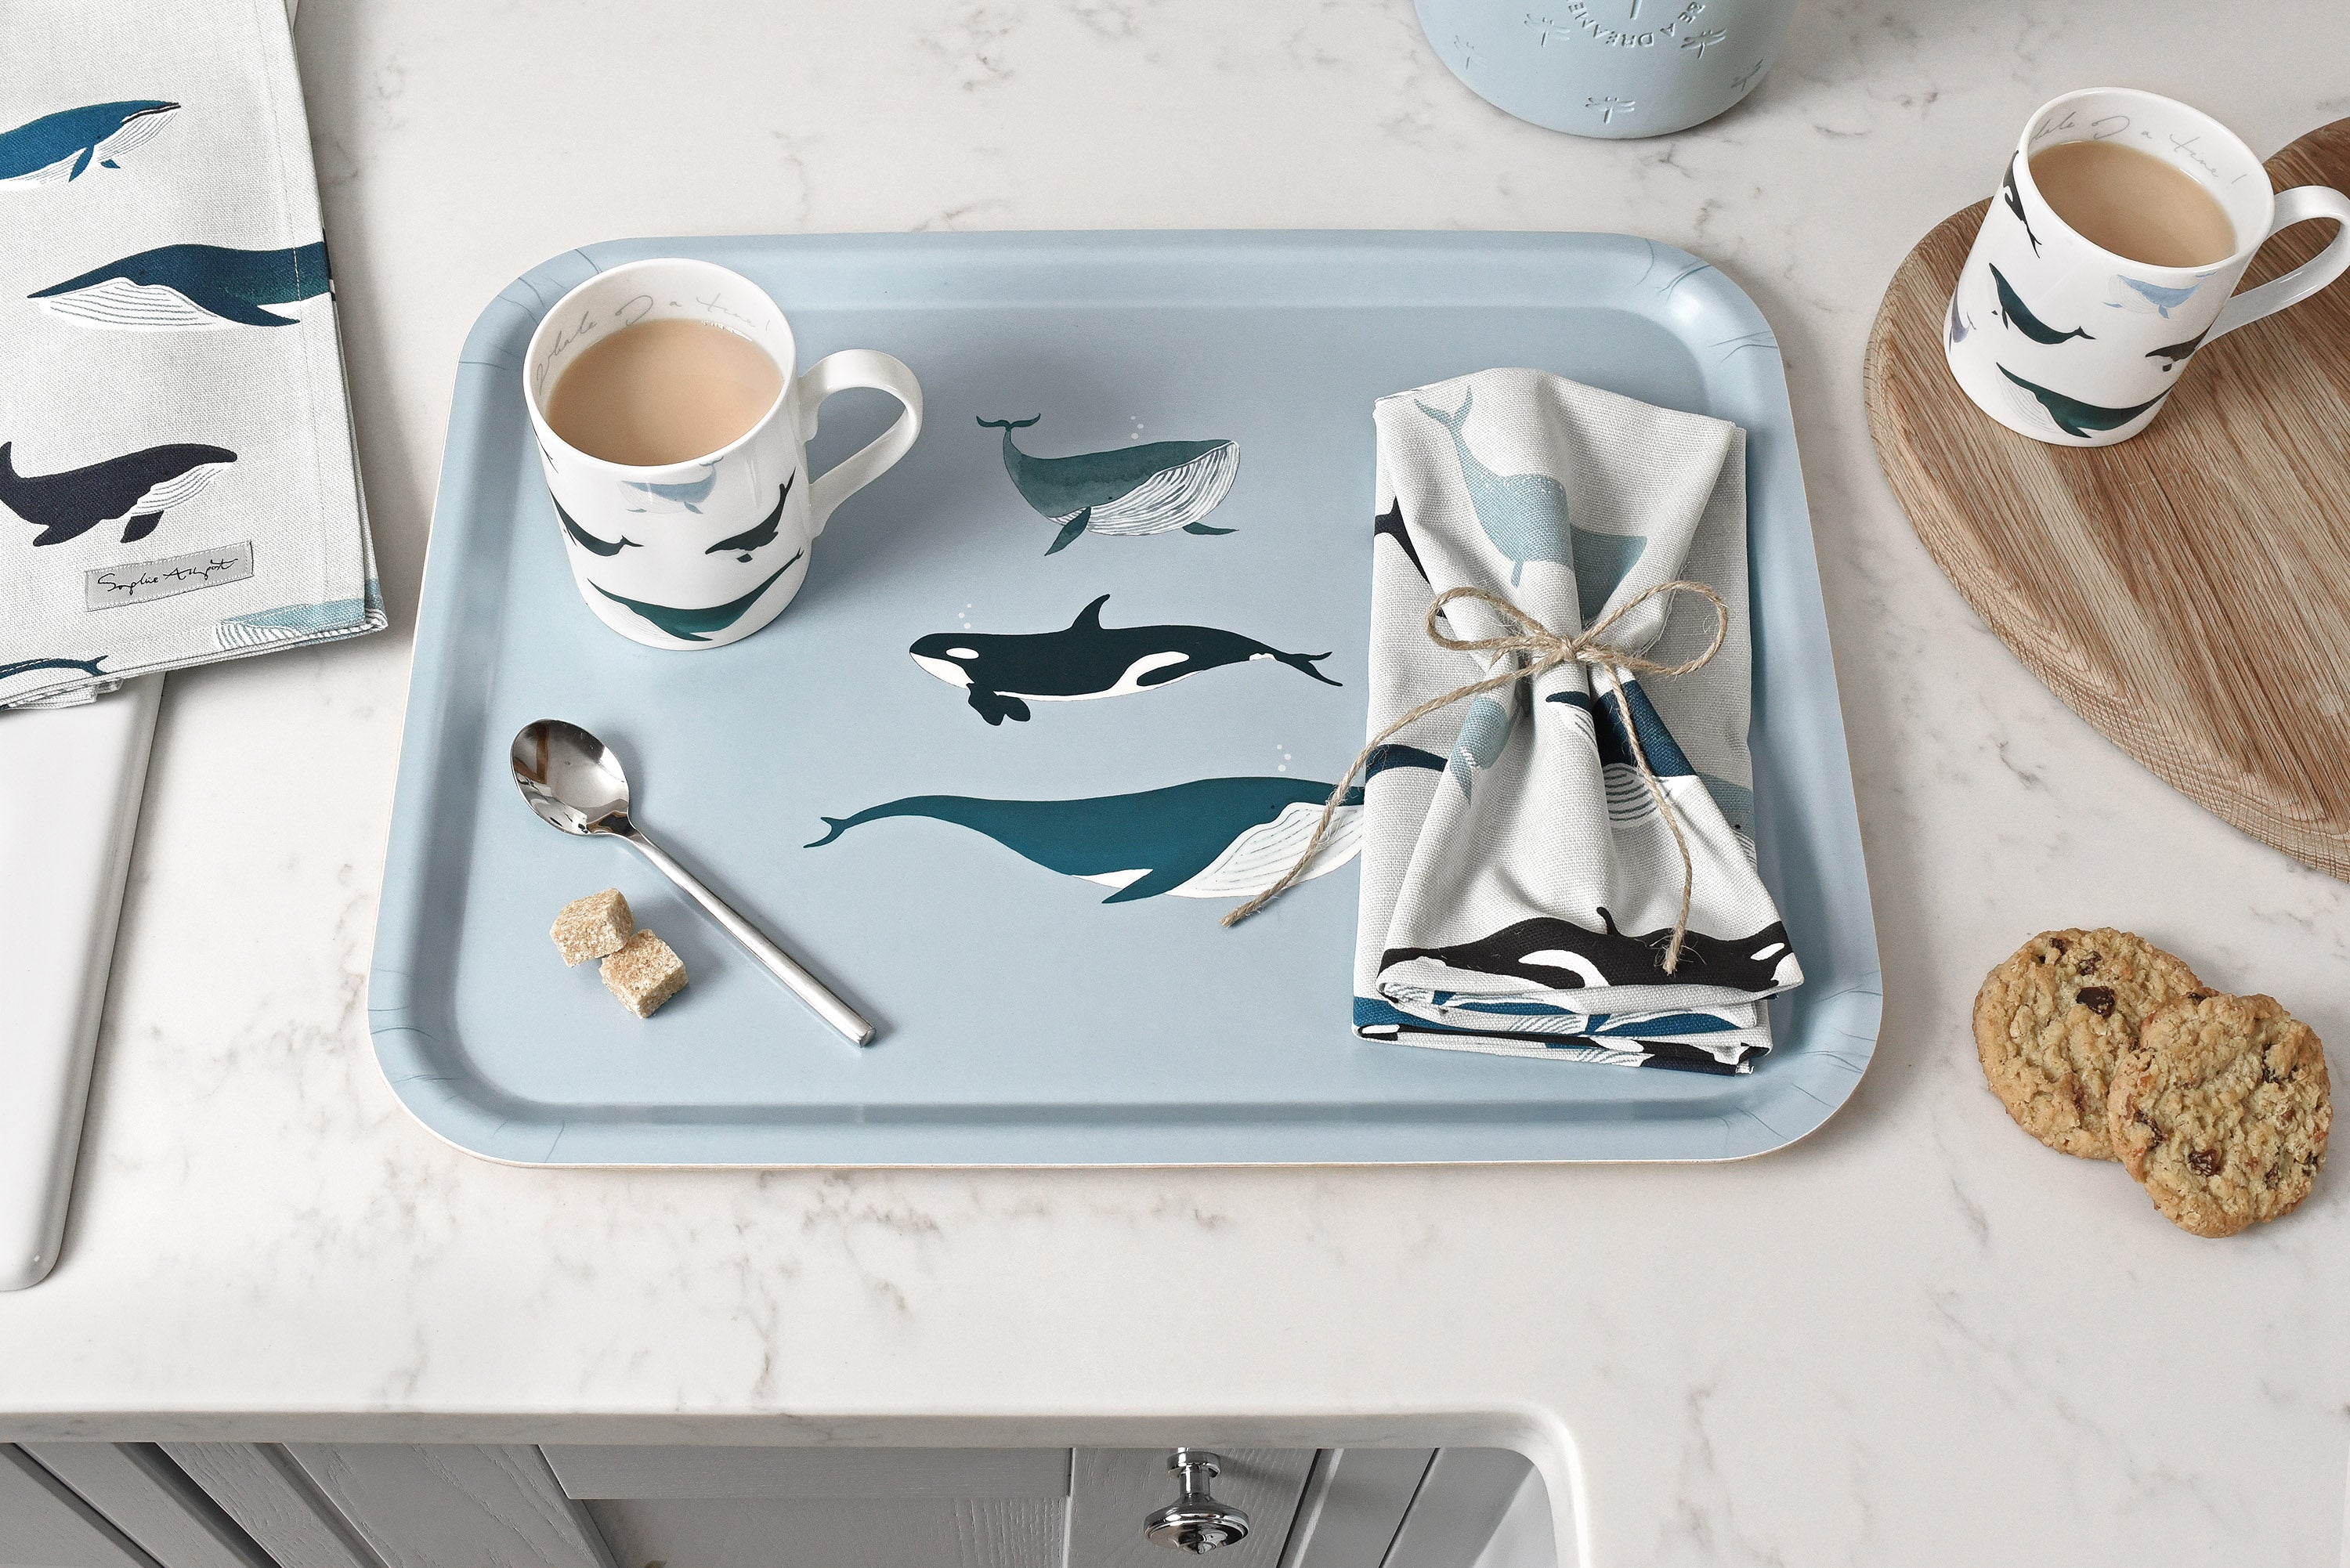 Whales printed tray and napkins by Sophie Allport